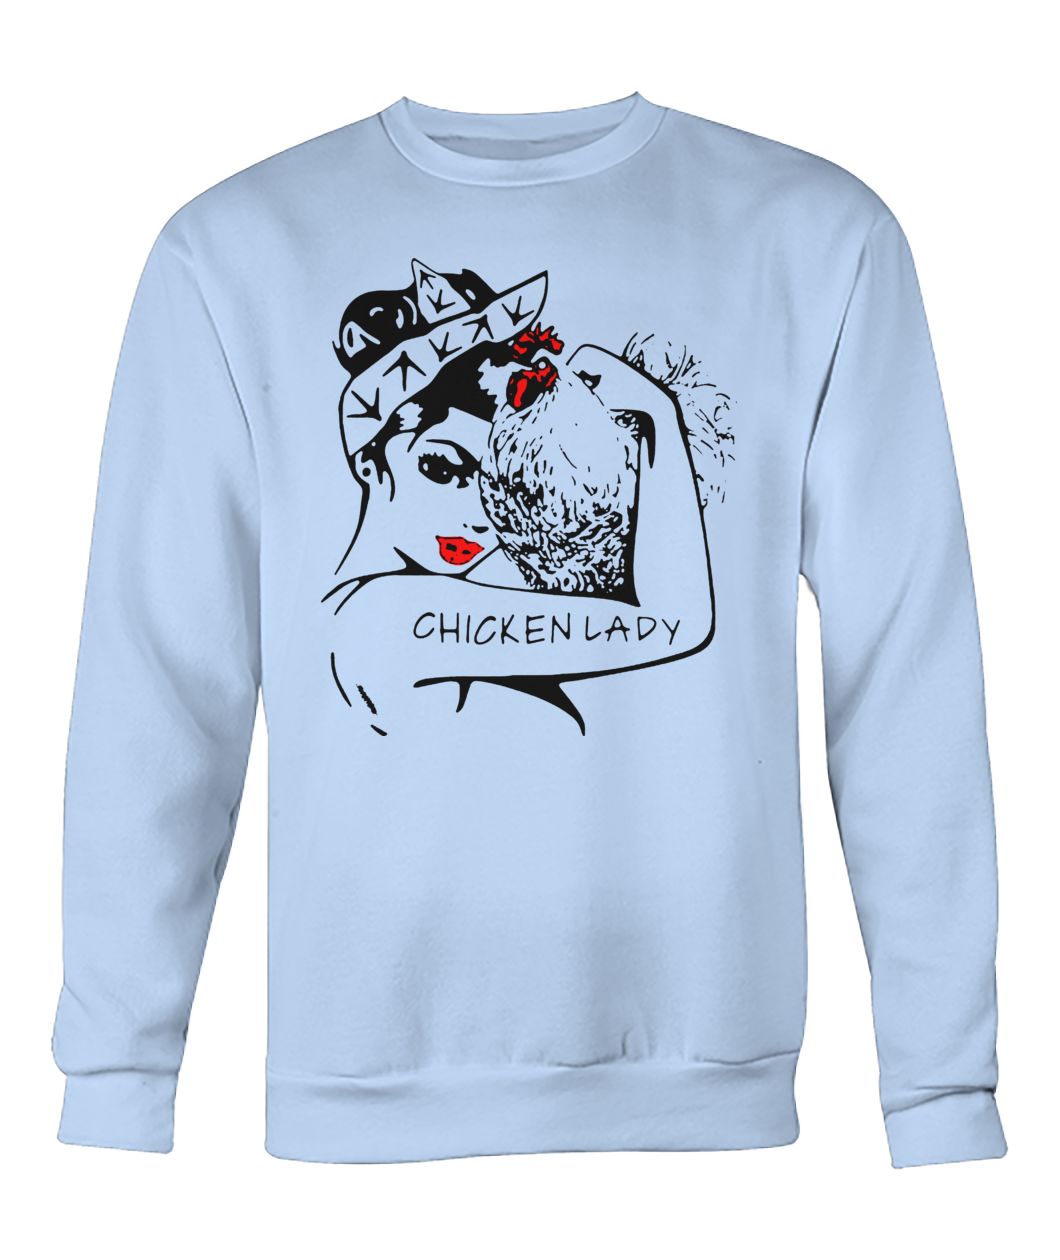 Chicken and unbreakable strong woman chicken lady crew neck sweatshirt